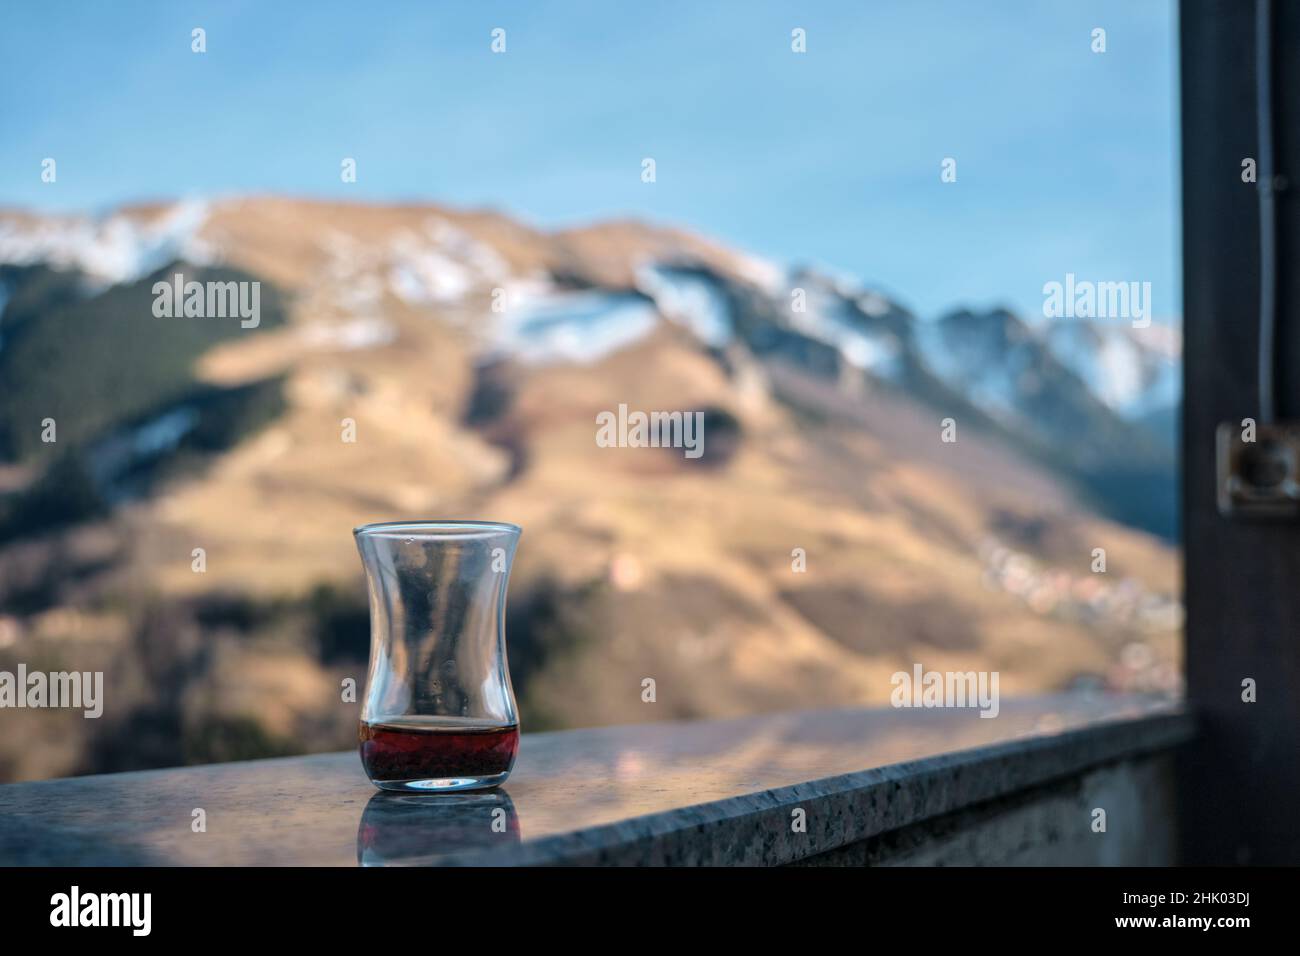 slim waisted tea glass. finished traditional turkish tea and reflection on marbles stone in macka, hamsikoy trabzon. Stock Photo